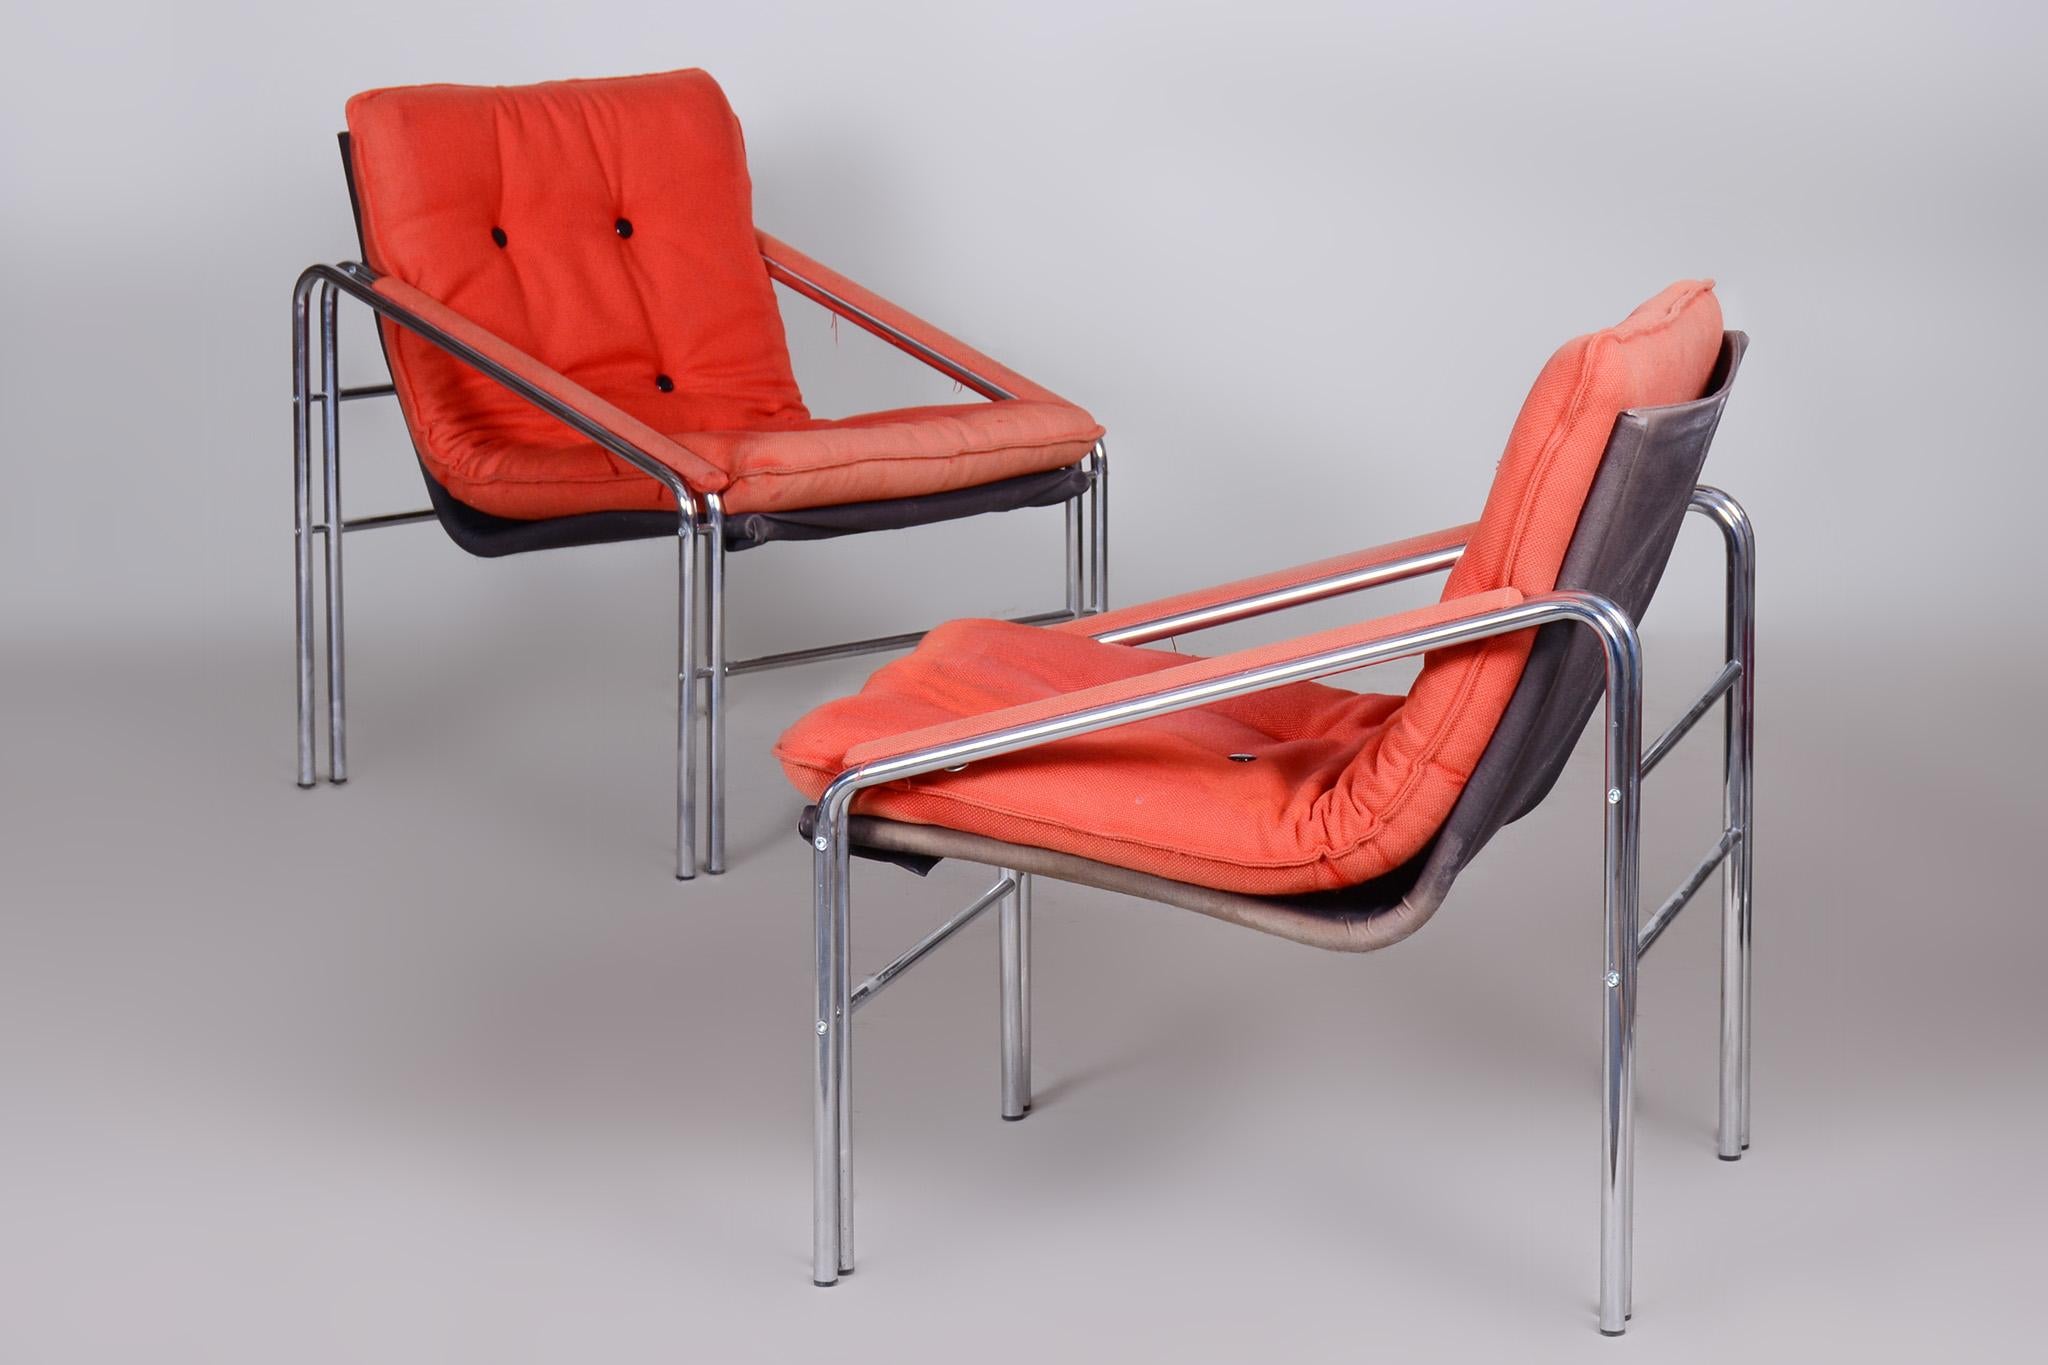 Fabric Original Pair of Midcentury Armchairs, Very Well-Preserved, Czechia, 1960s For Sale